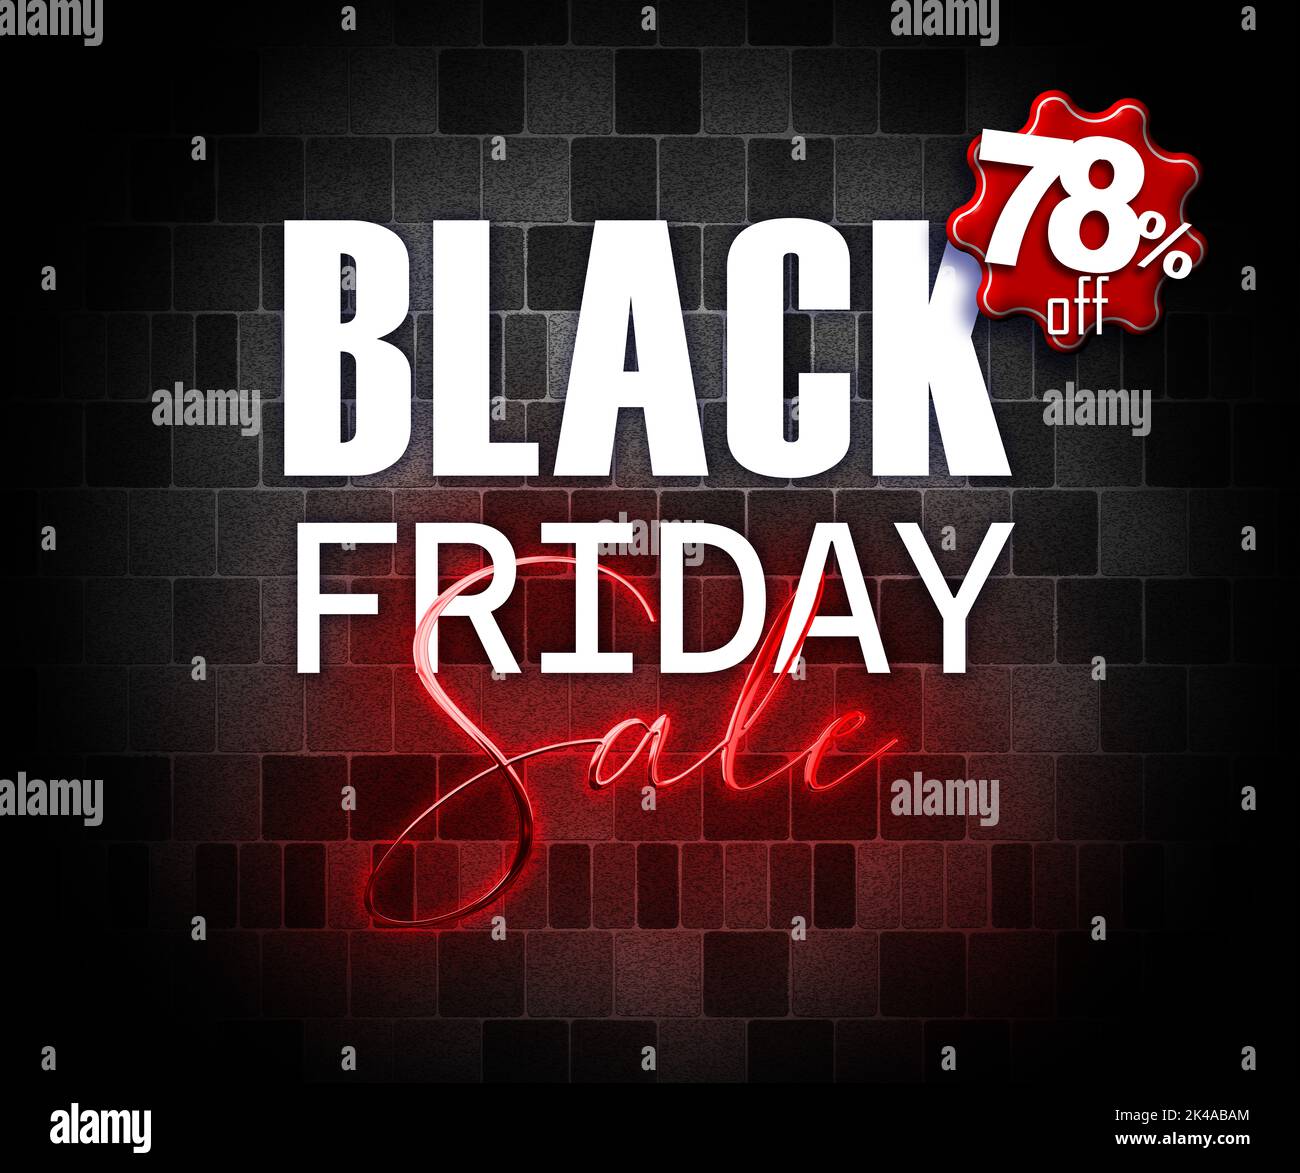 illustration with 3d elements black friday promotion banner 78 percent off sales increase Stock Photo